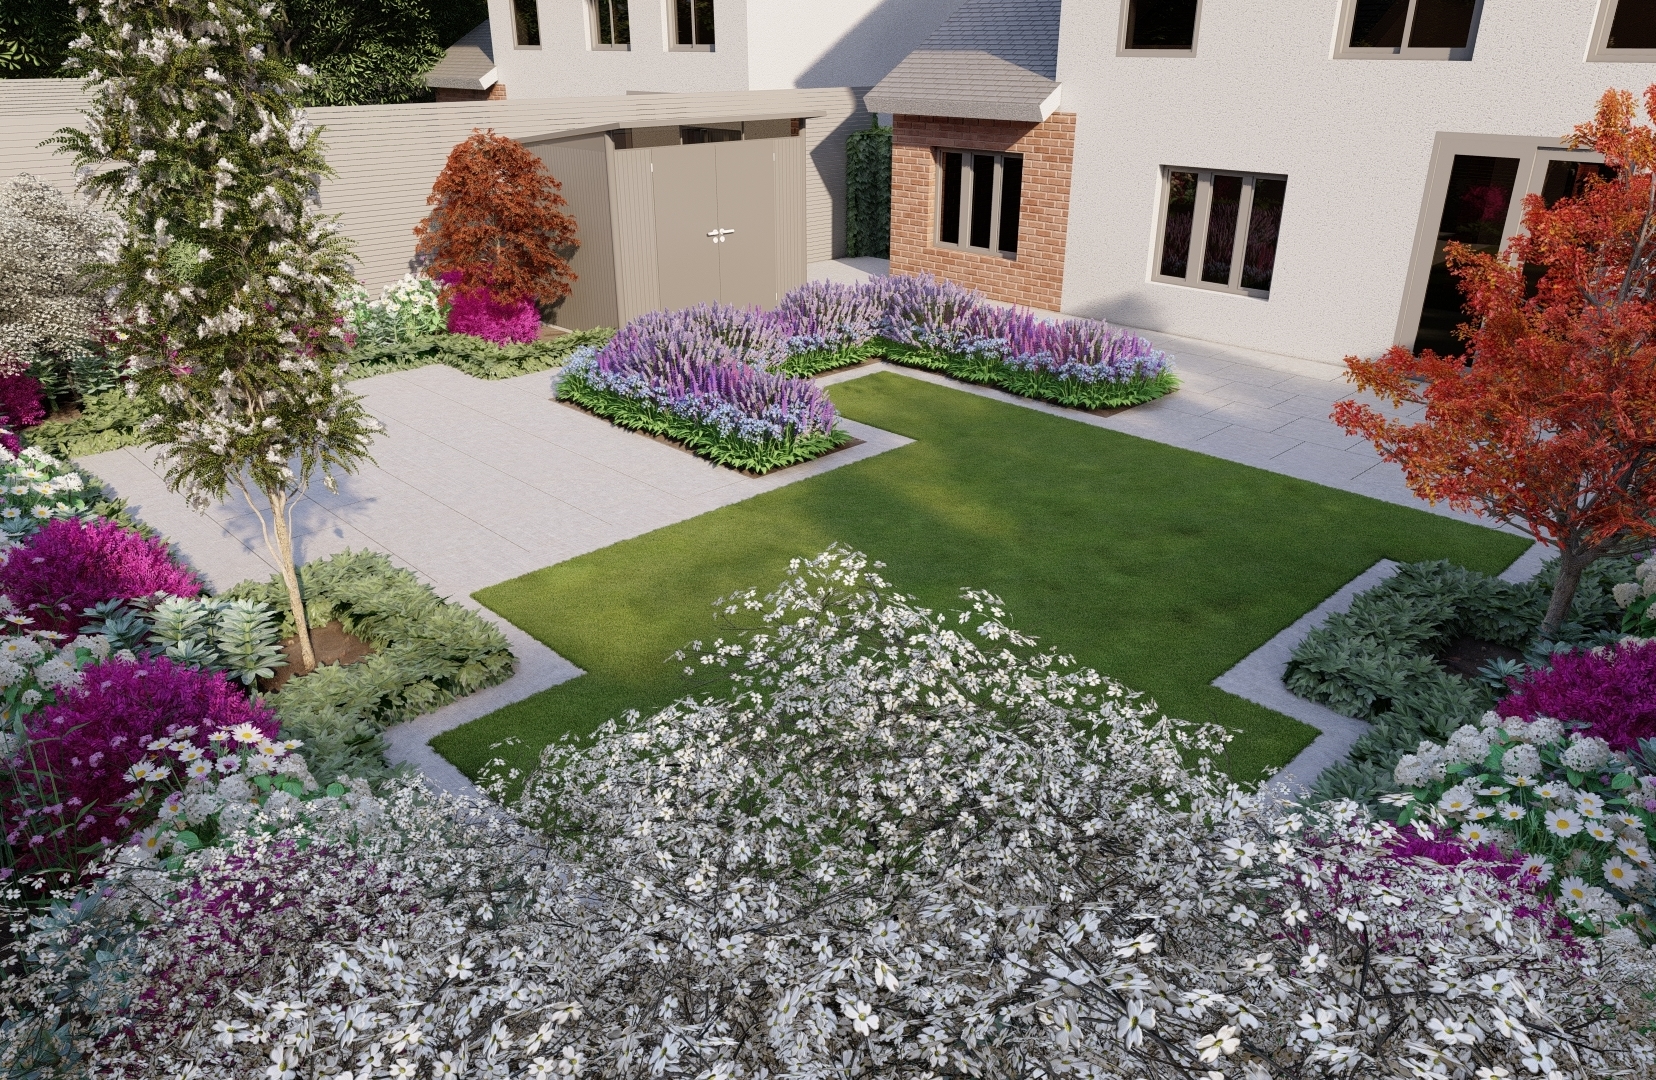 Colourful yet low maintenance planting schemes are a feature of this Family Garden Design in Dunshaughlin, Co Meath | Owen Chubb Garden Landscapers, Tel 087-2306128